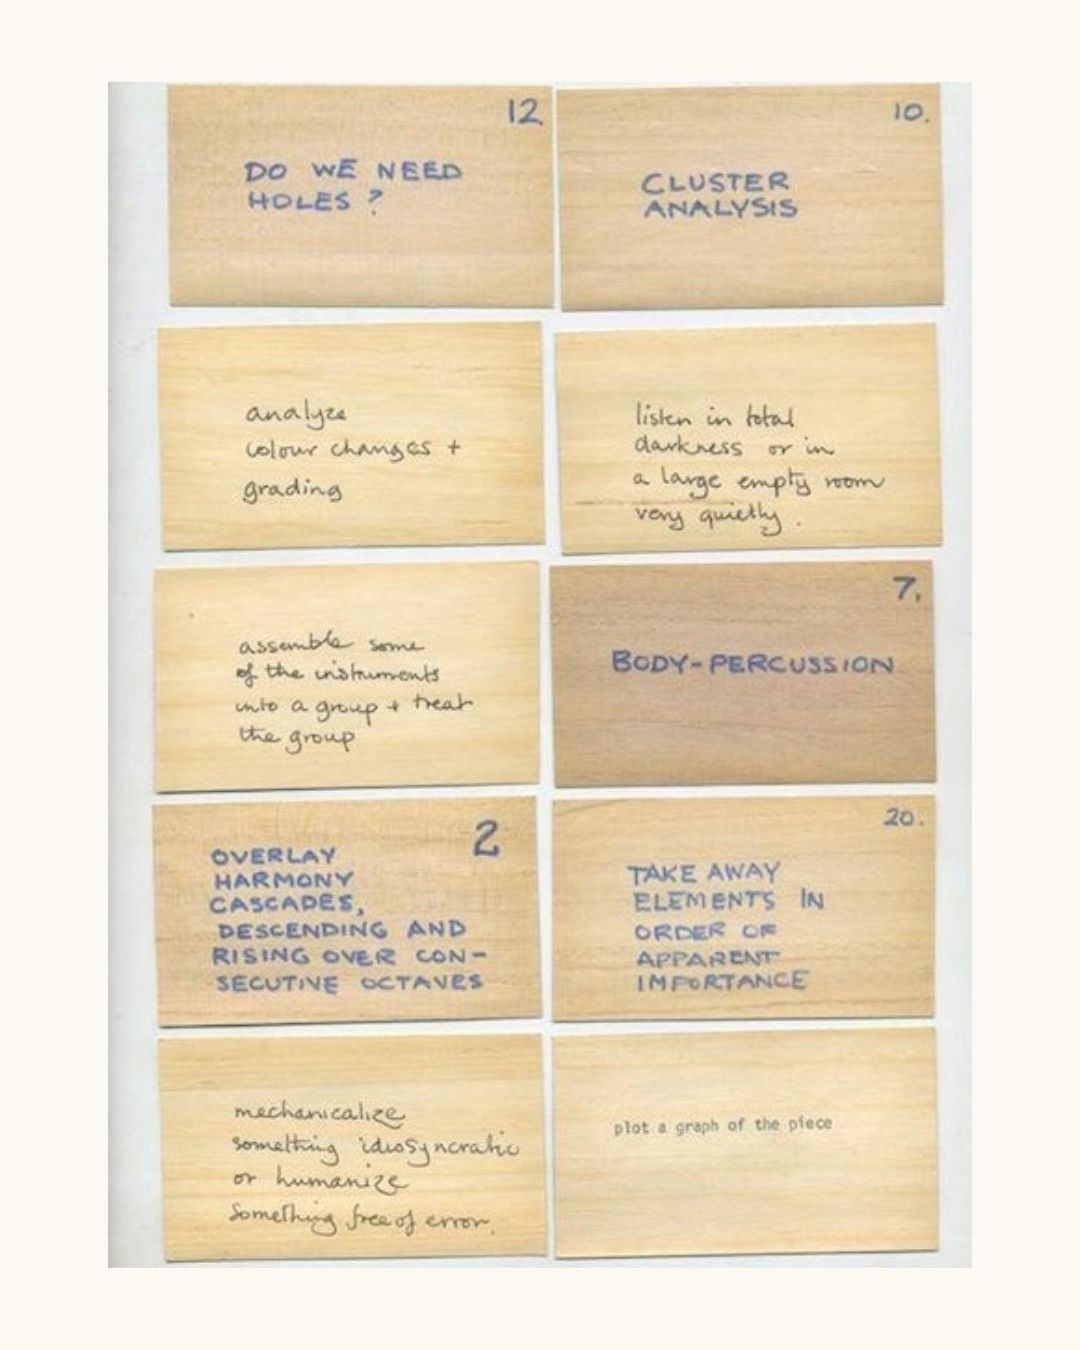 Oblique Strategies by Brian Eno and multimedia artist Peter Schmidt